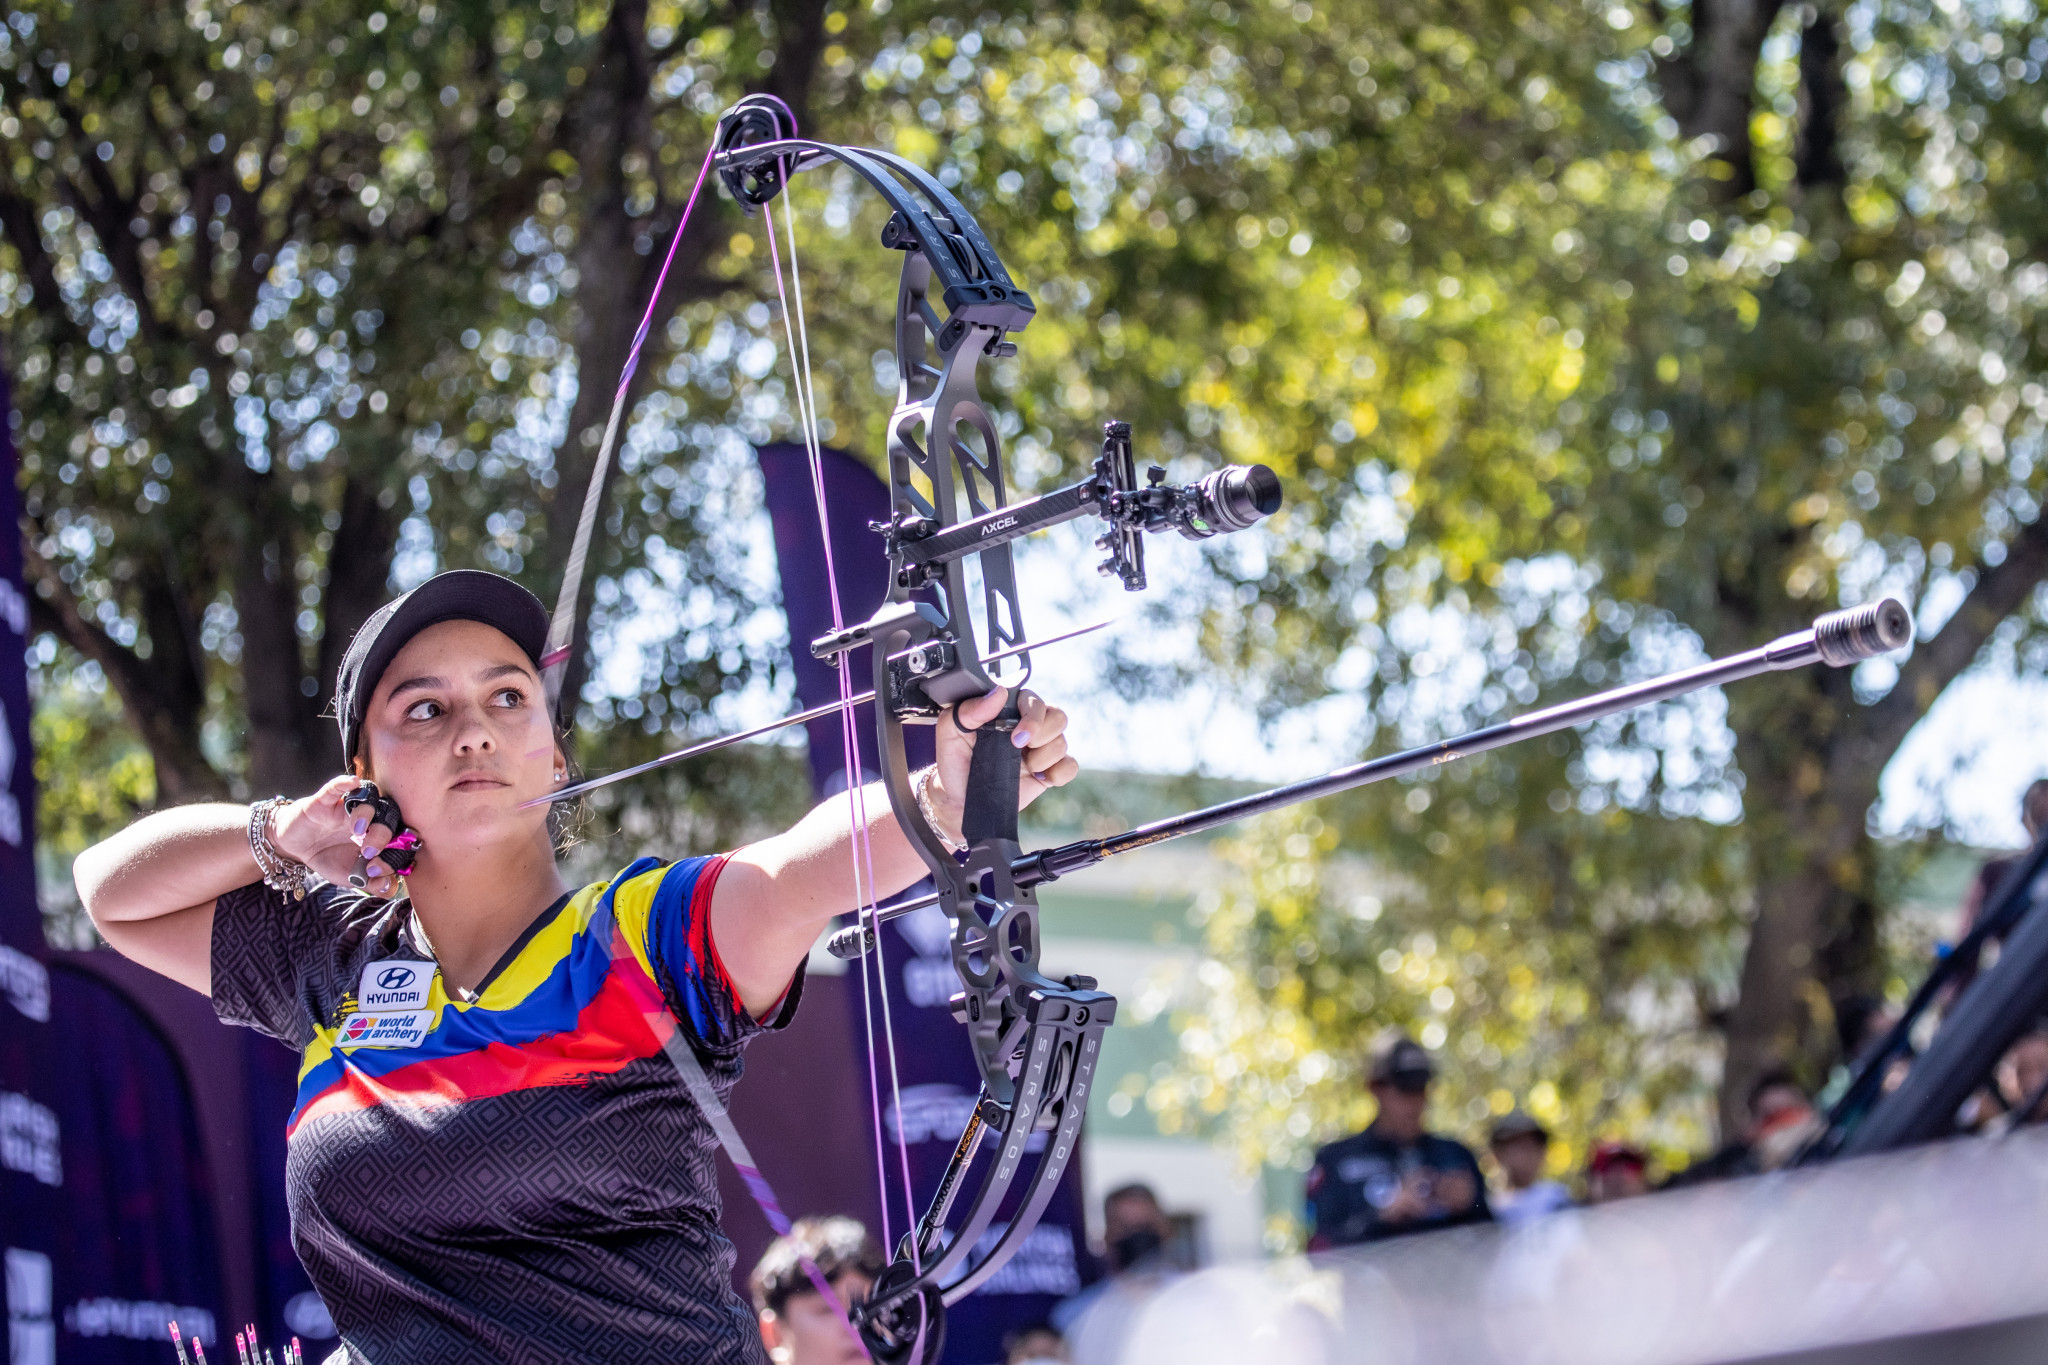 Colombia's Sara Lopez won the women's compound title in a high quality final against Ella Gibson ©Getty Images